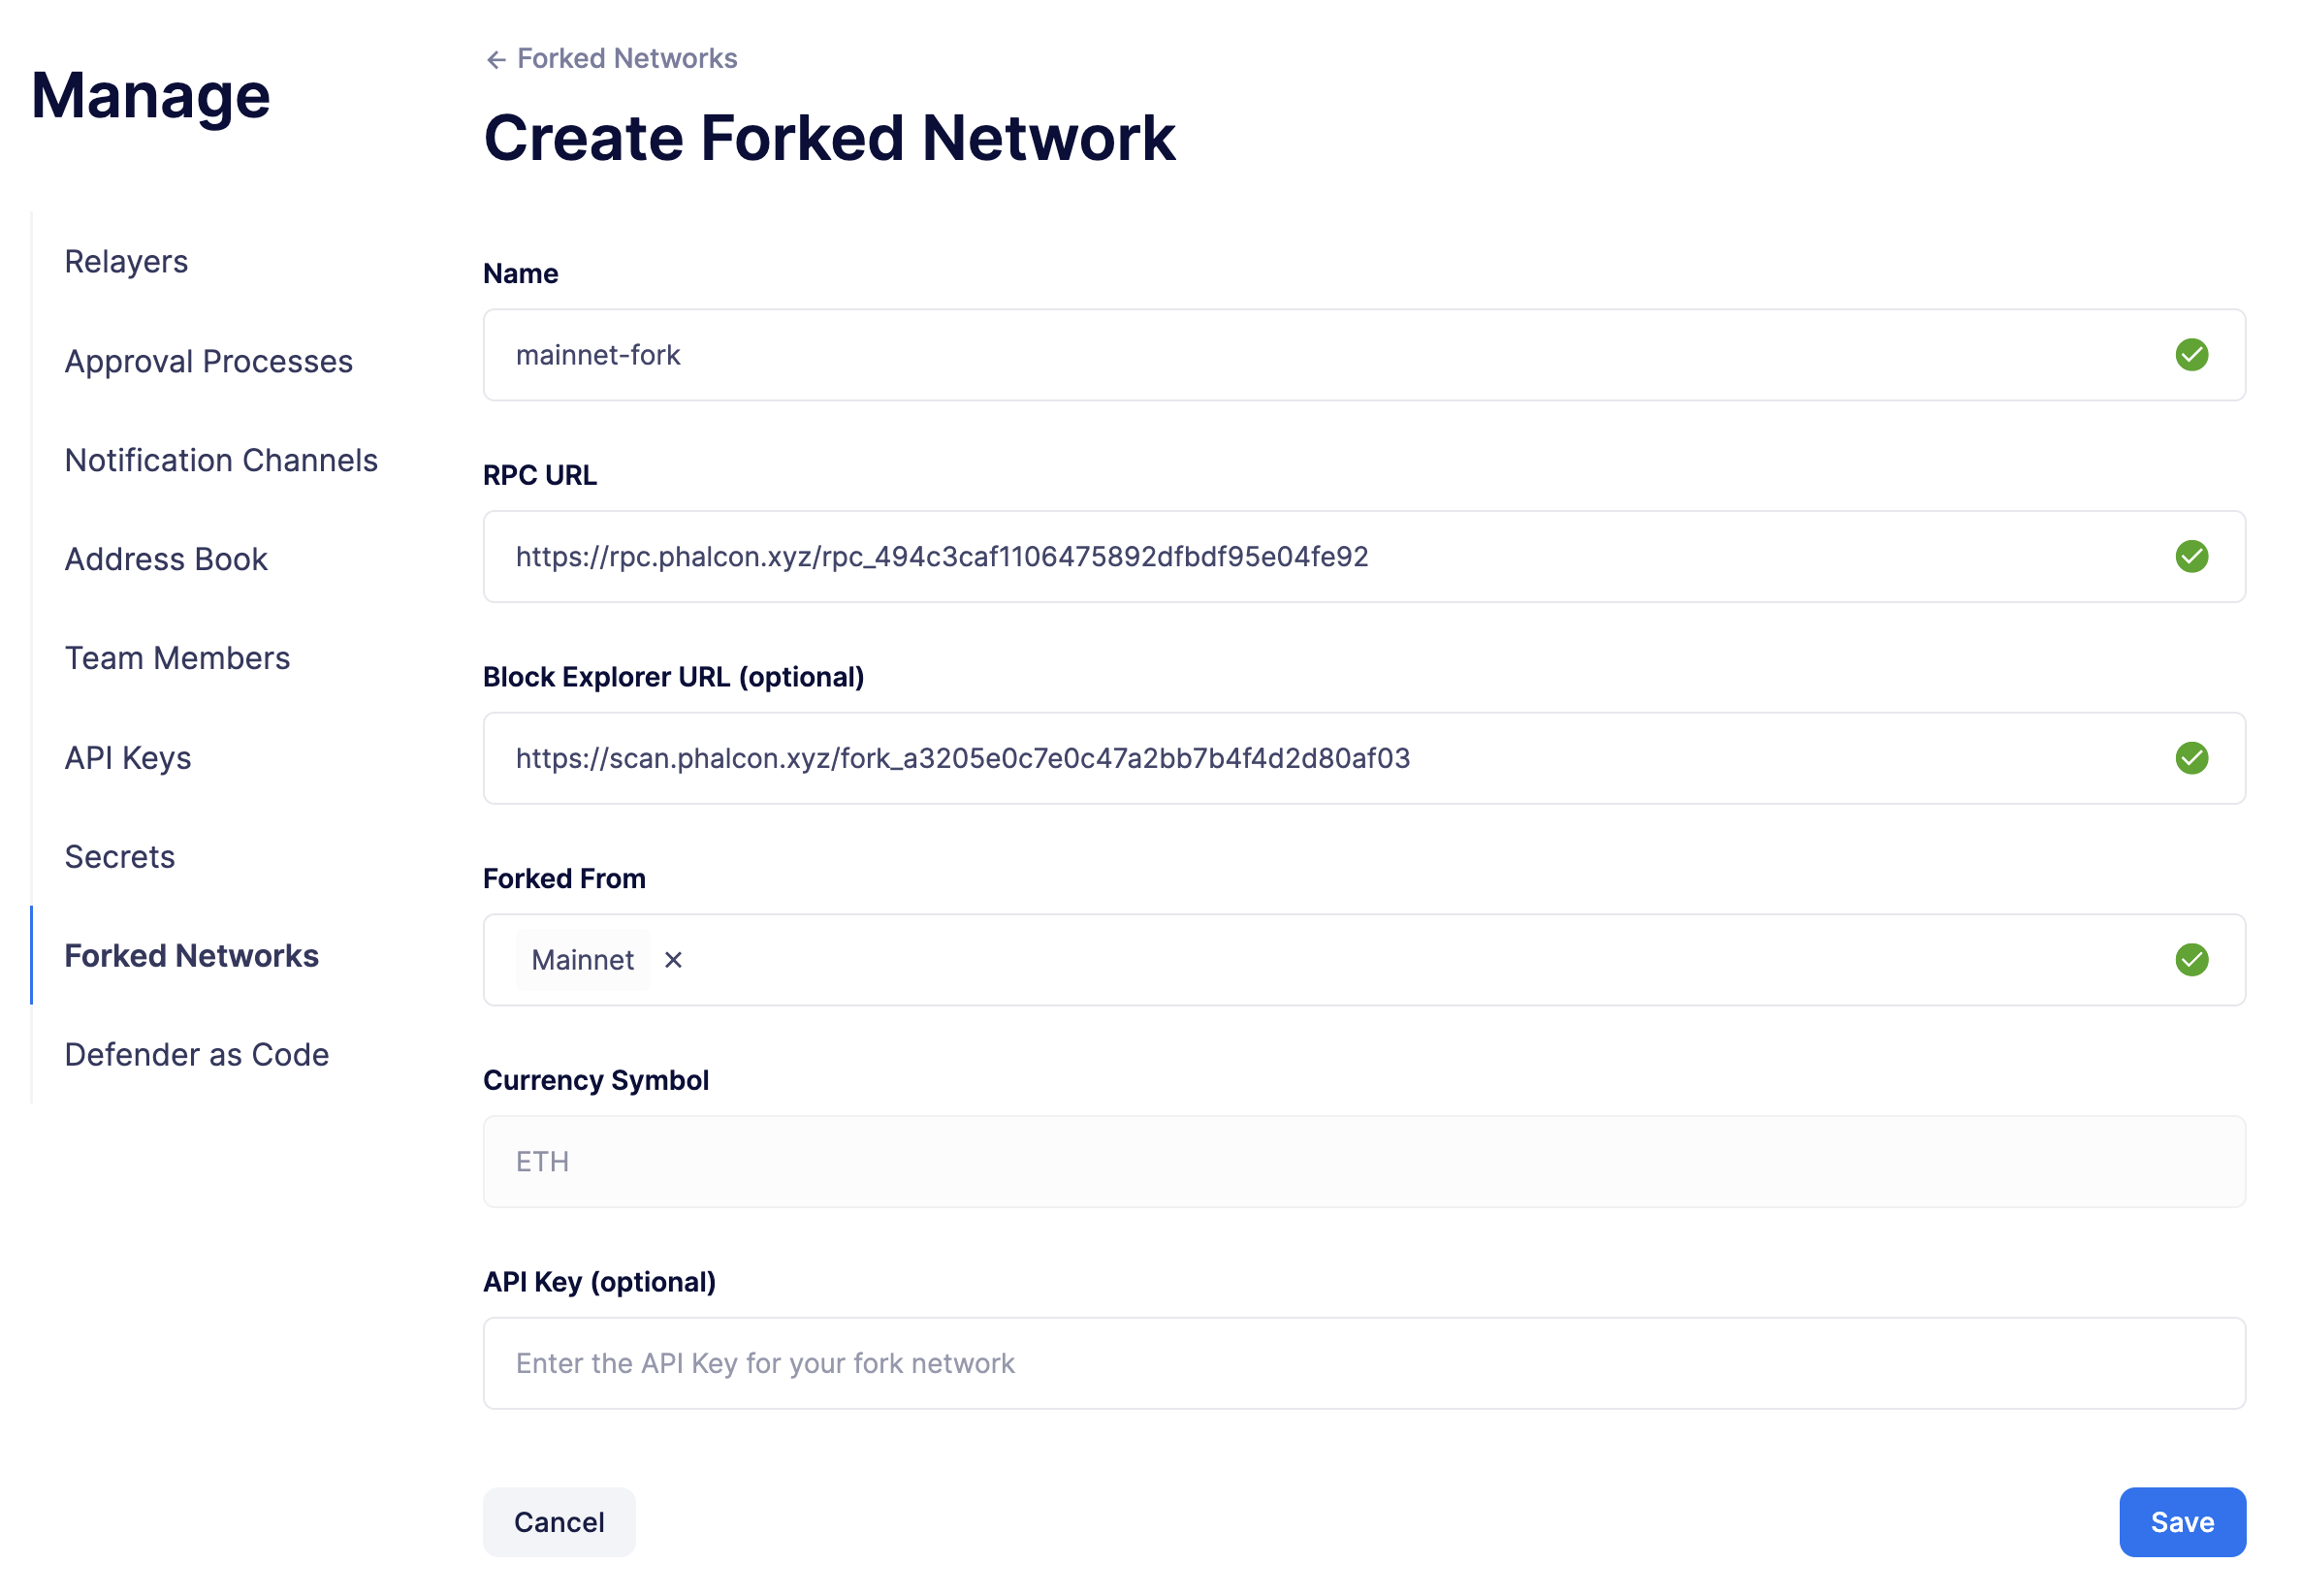 Forked Networks added network